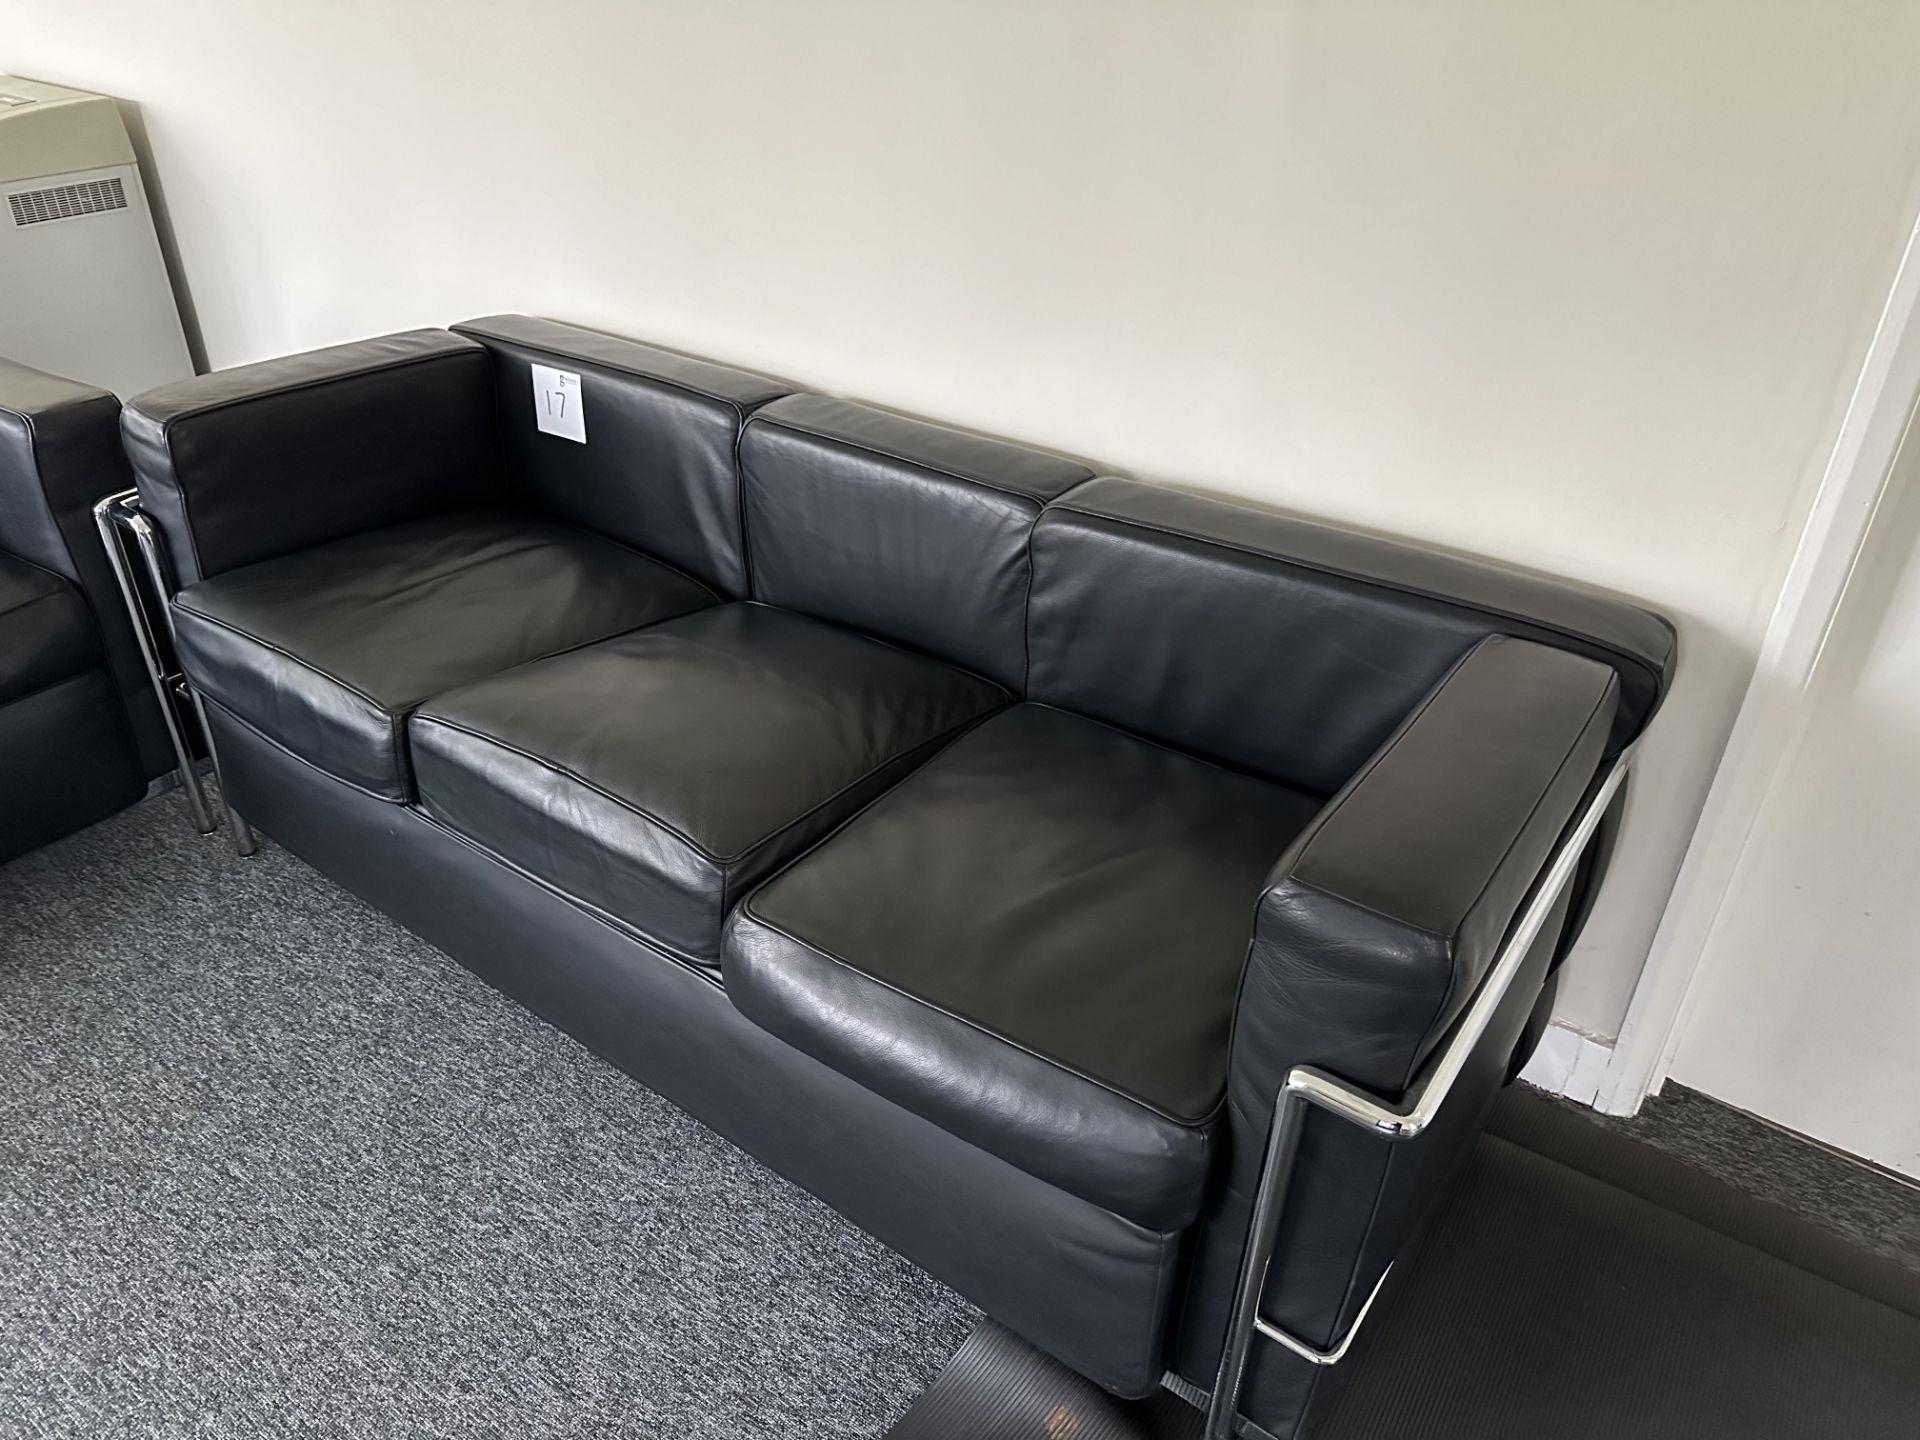 3 SEATER LEATHER SOFA - Image 2 of 2